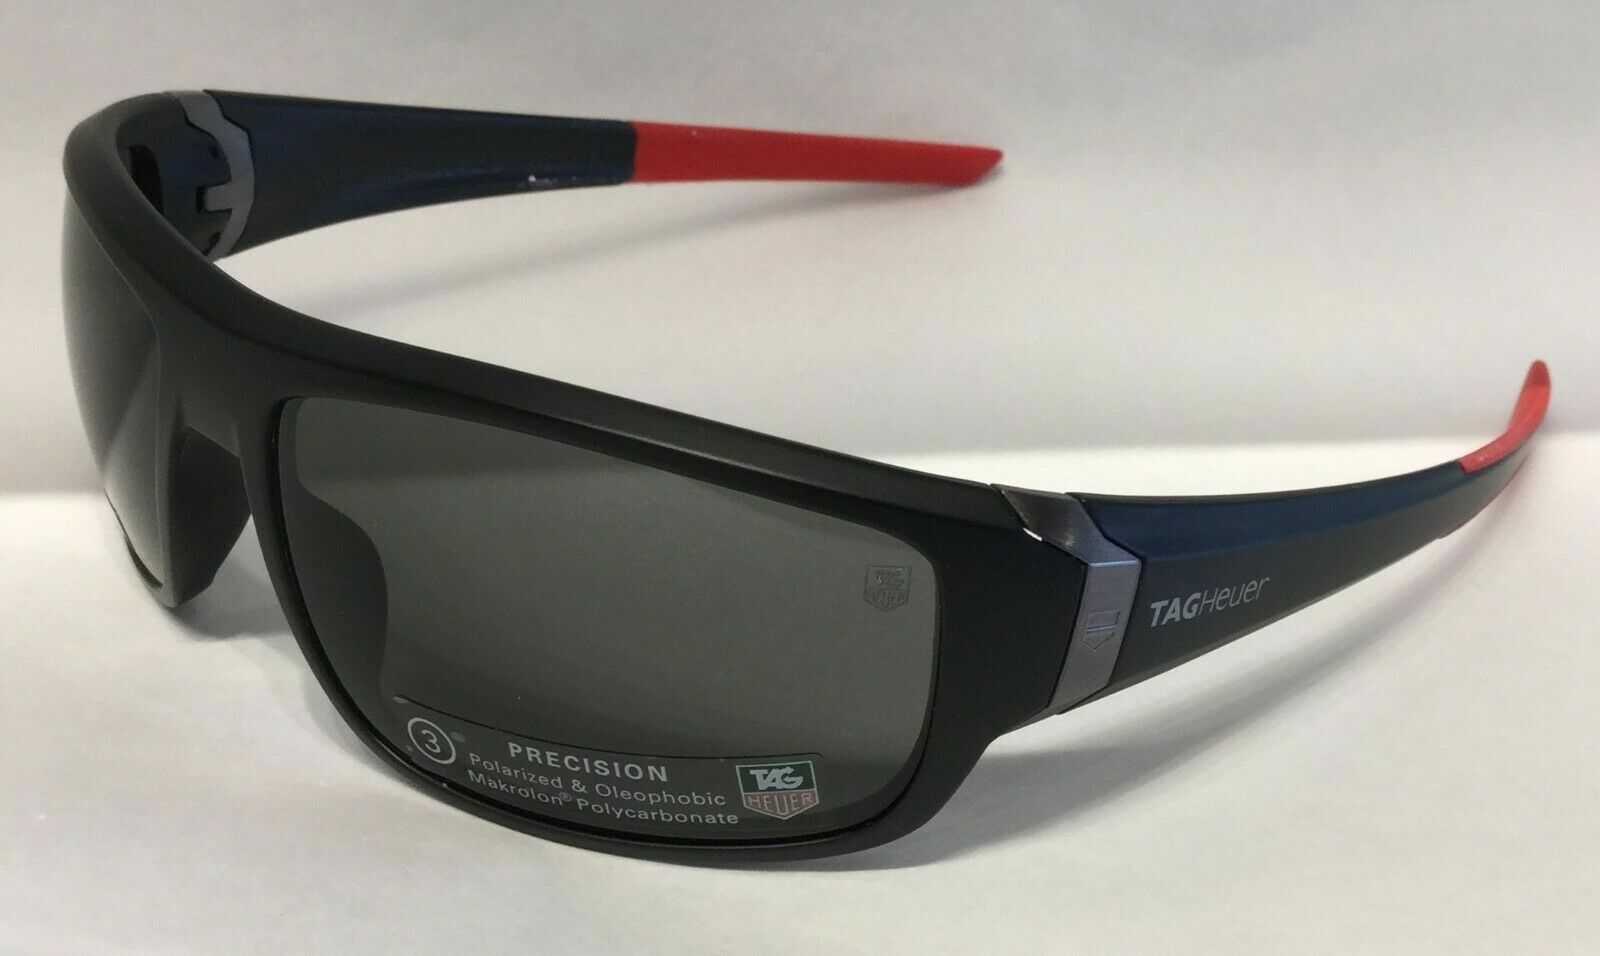 Tag Heuer TH9221 S 901 Black/Red Mirrored Polarized Sunglasses